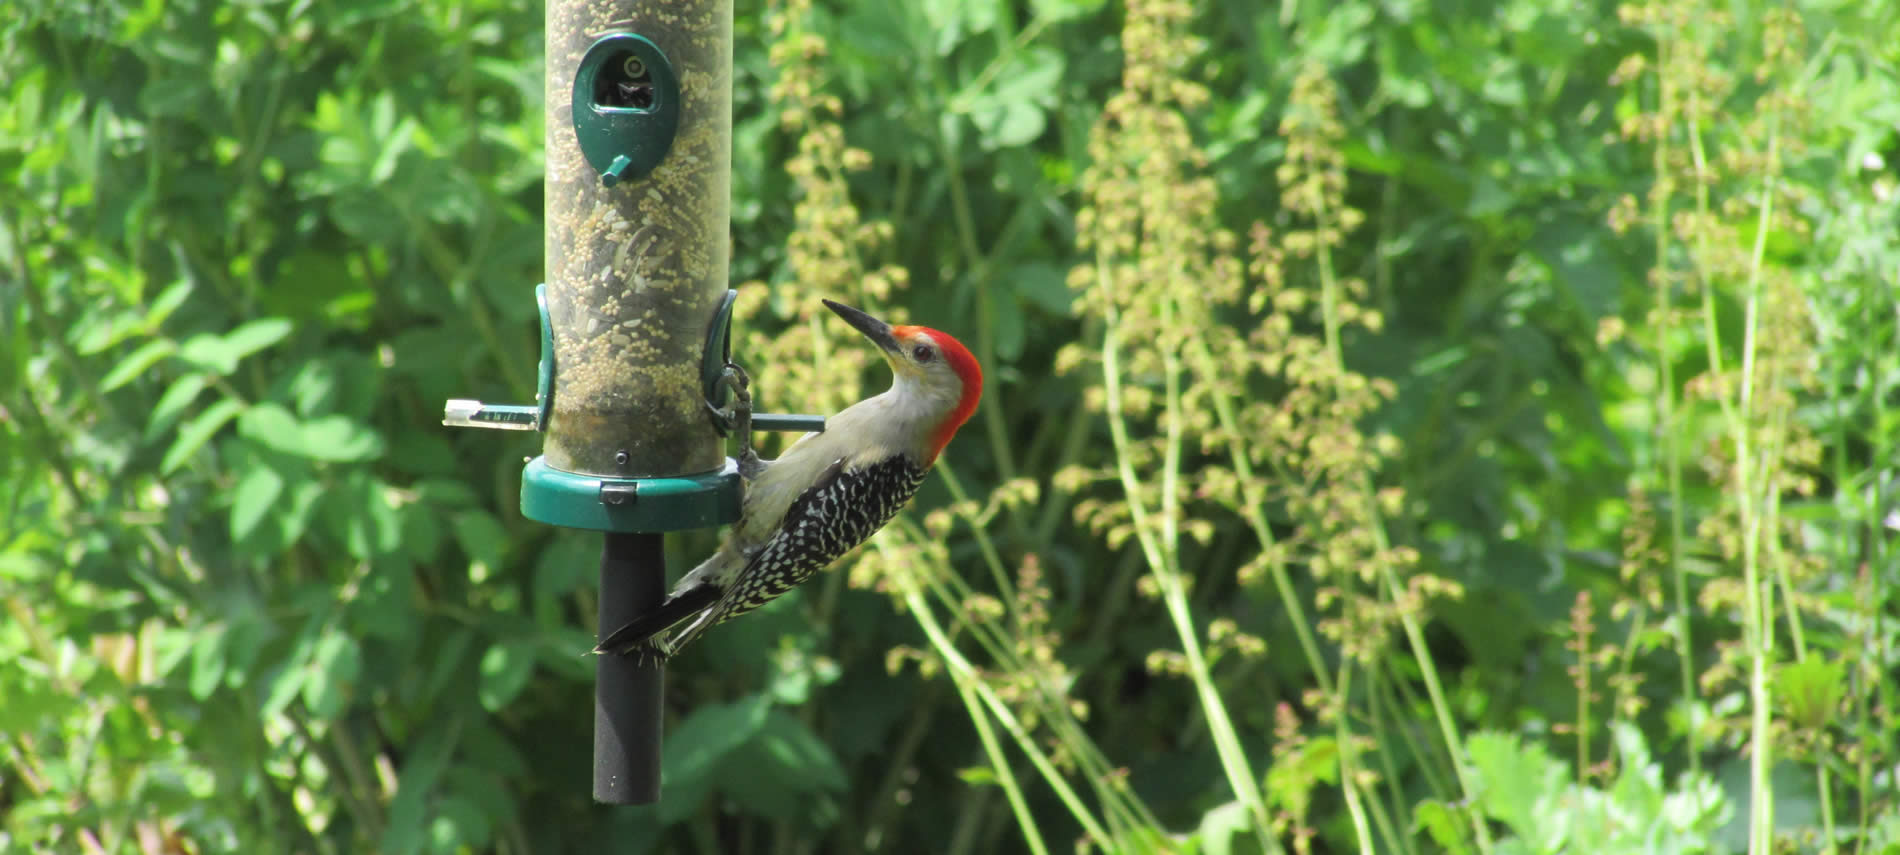 Close-up view of red-headed woodpecker on a bird feeder surrounded by green foliage